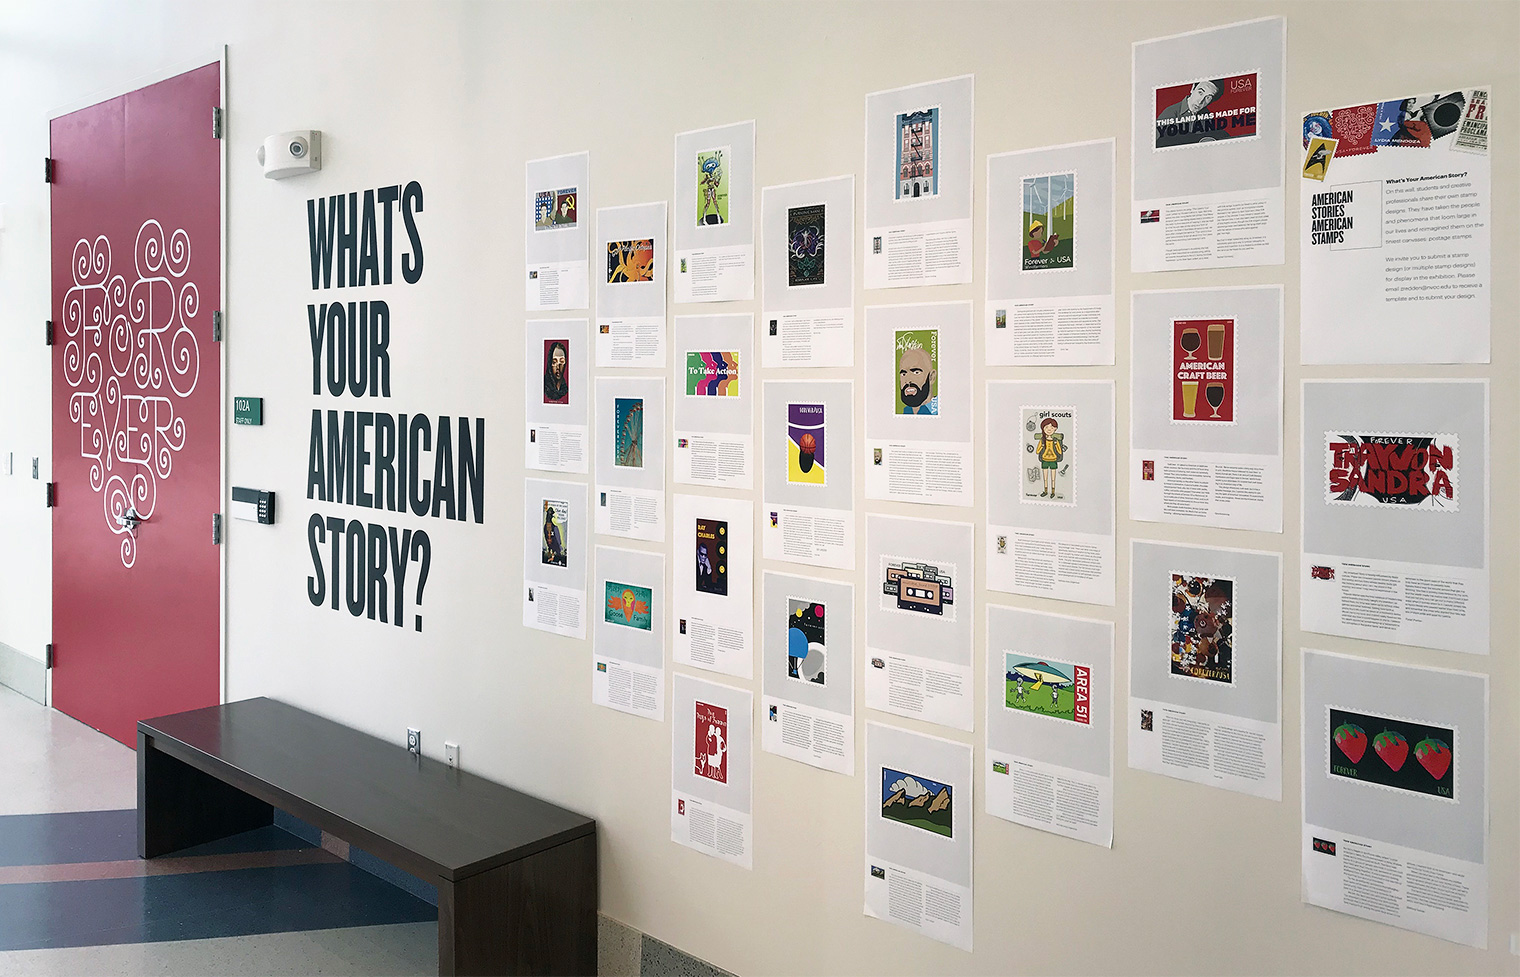 The exhibition included stamp designs created by NOVA students, responding to the prompt “What’s your American story?”